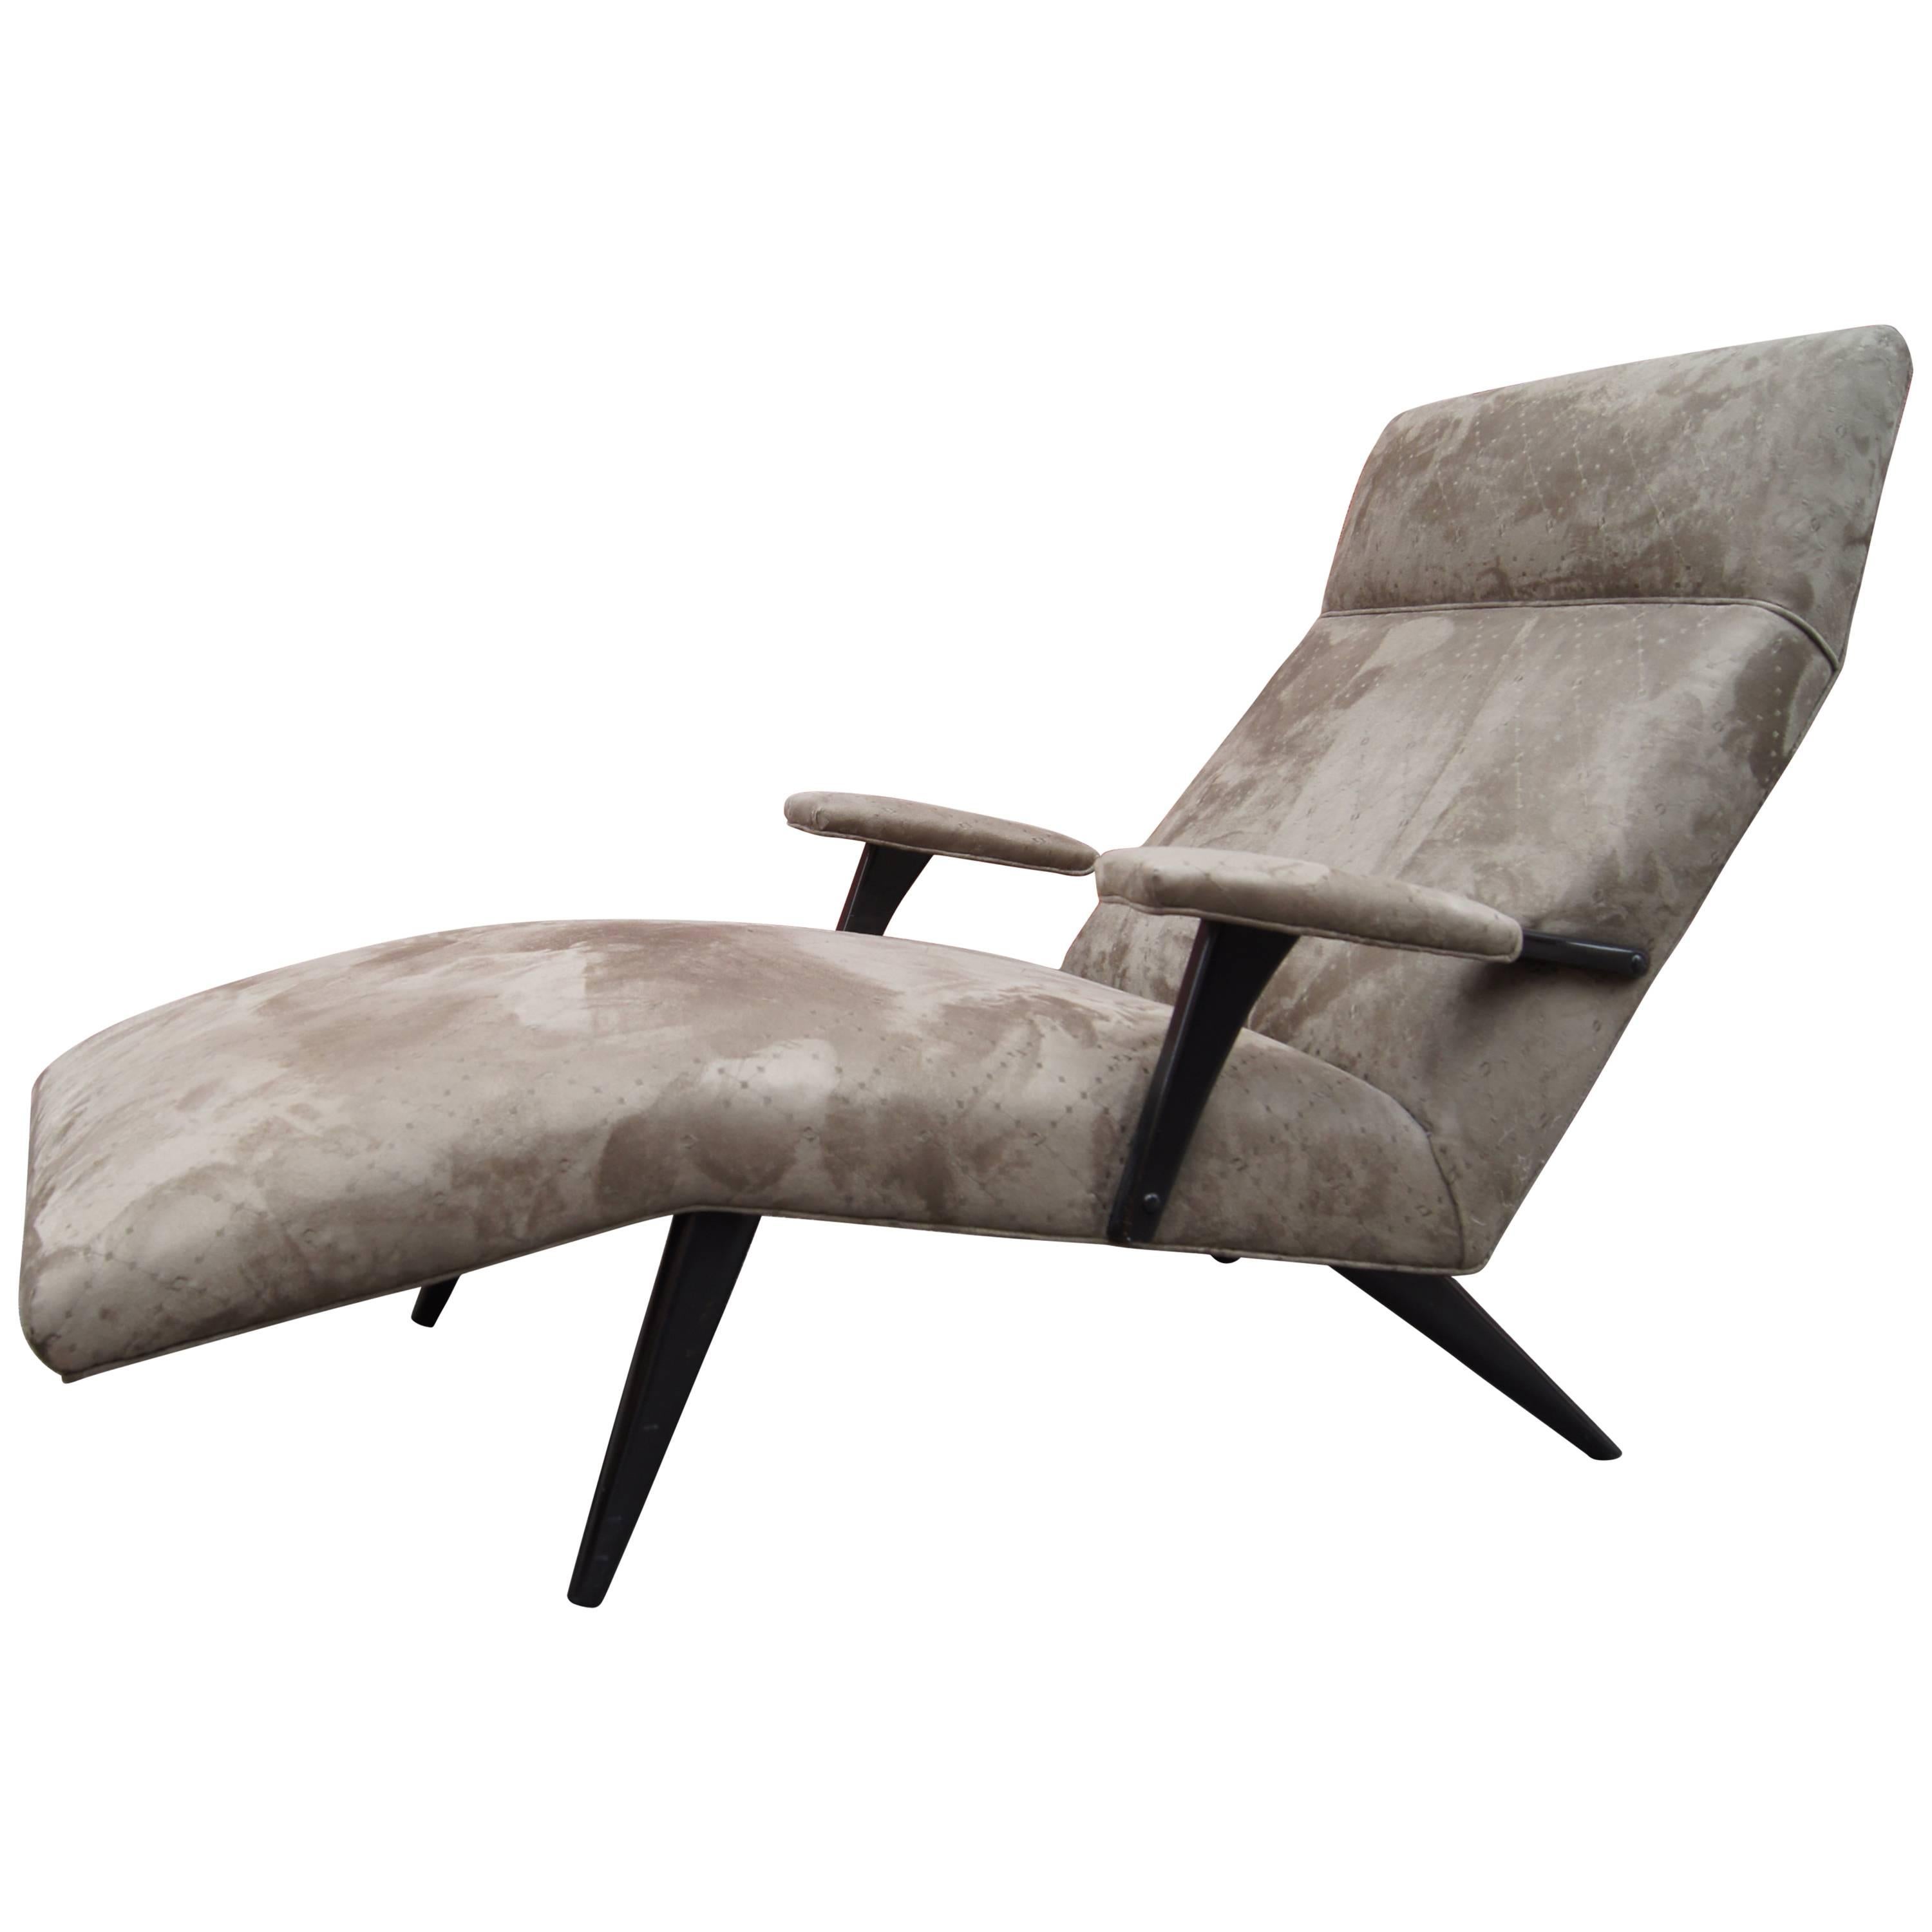 Mid-Century American Chaise Longue in Microsuede